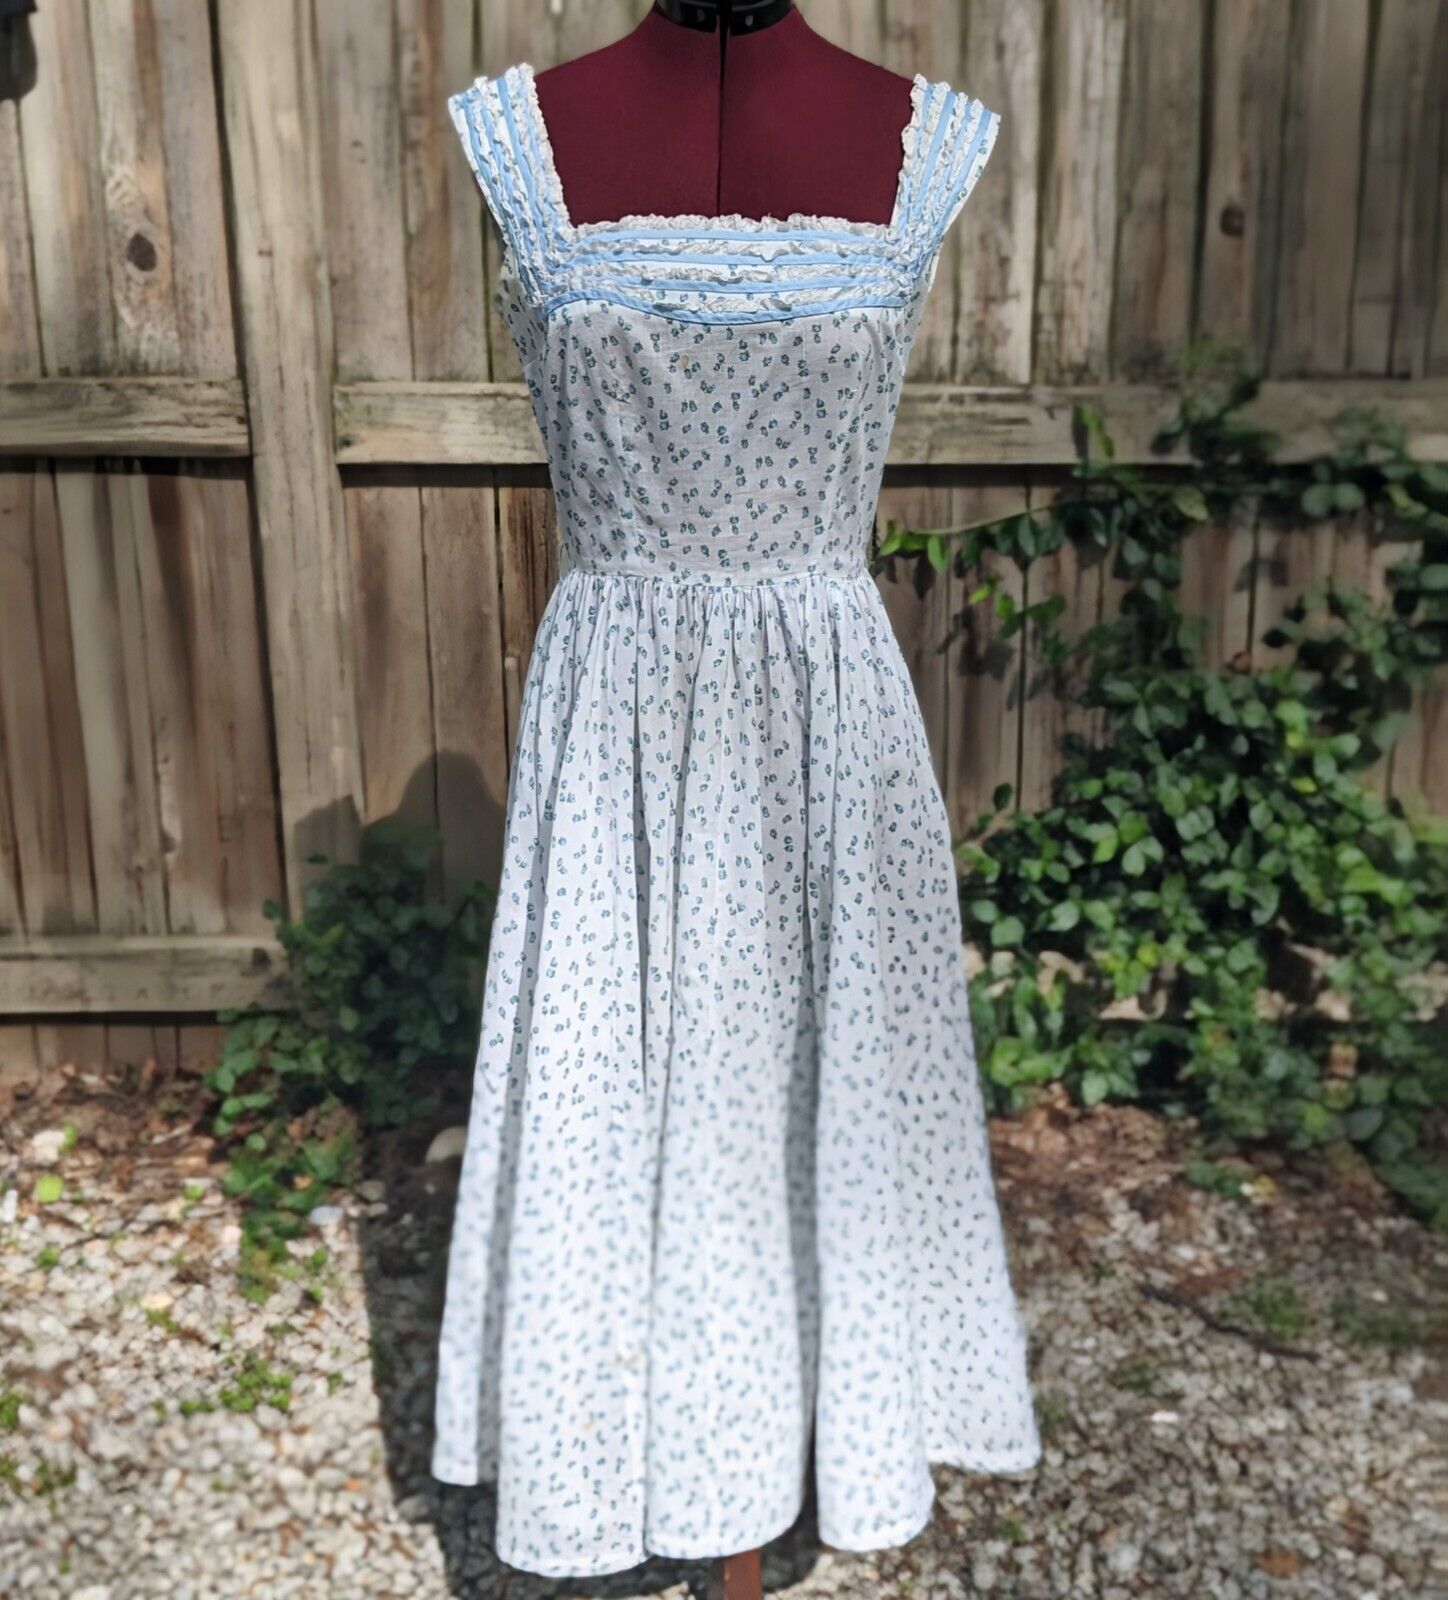 Vintage 1950s Jerry Gilden Summer Day Dress with Lots of Ruffled Lace Details 